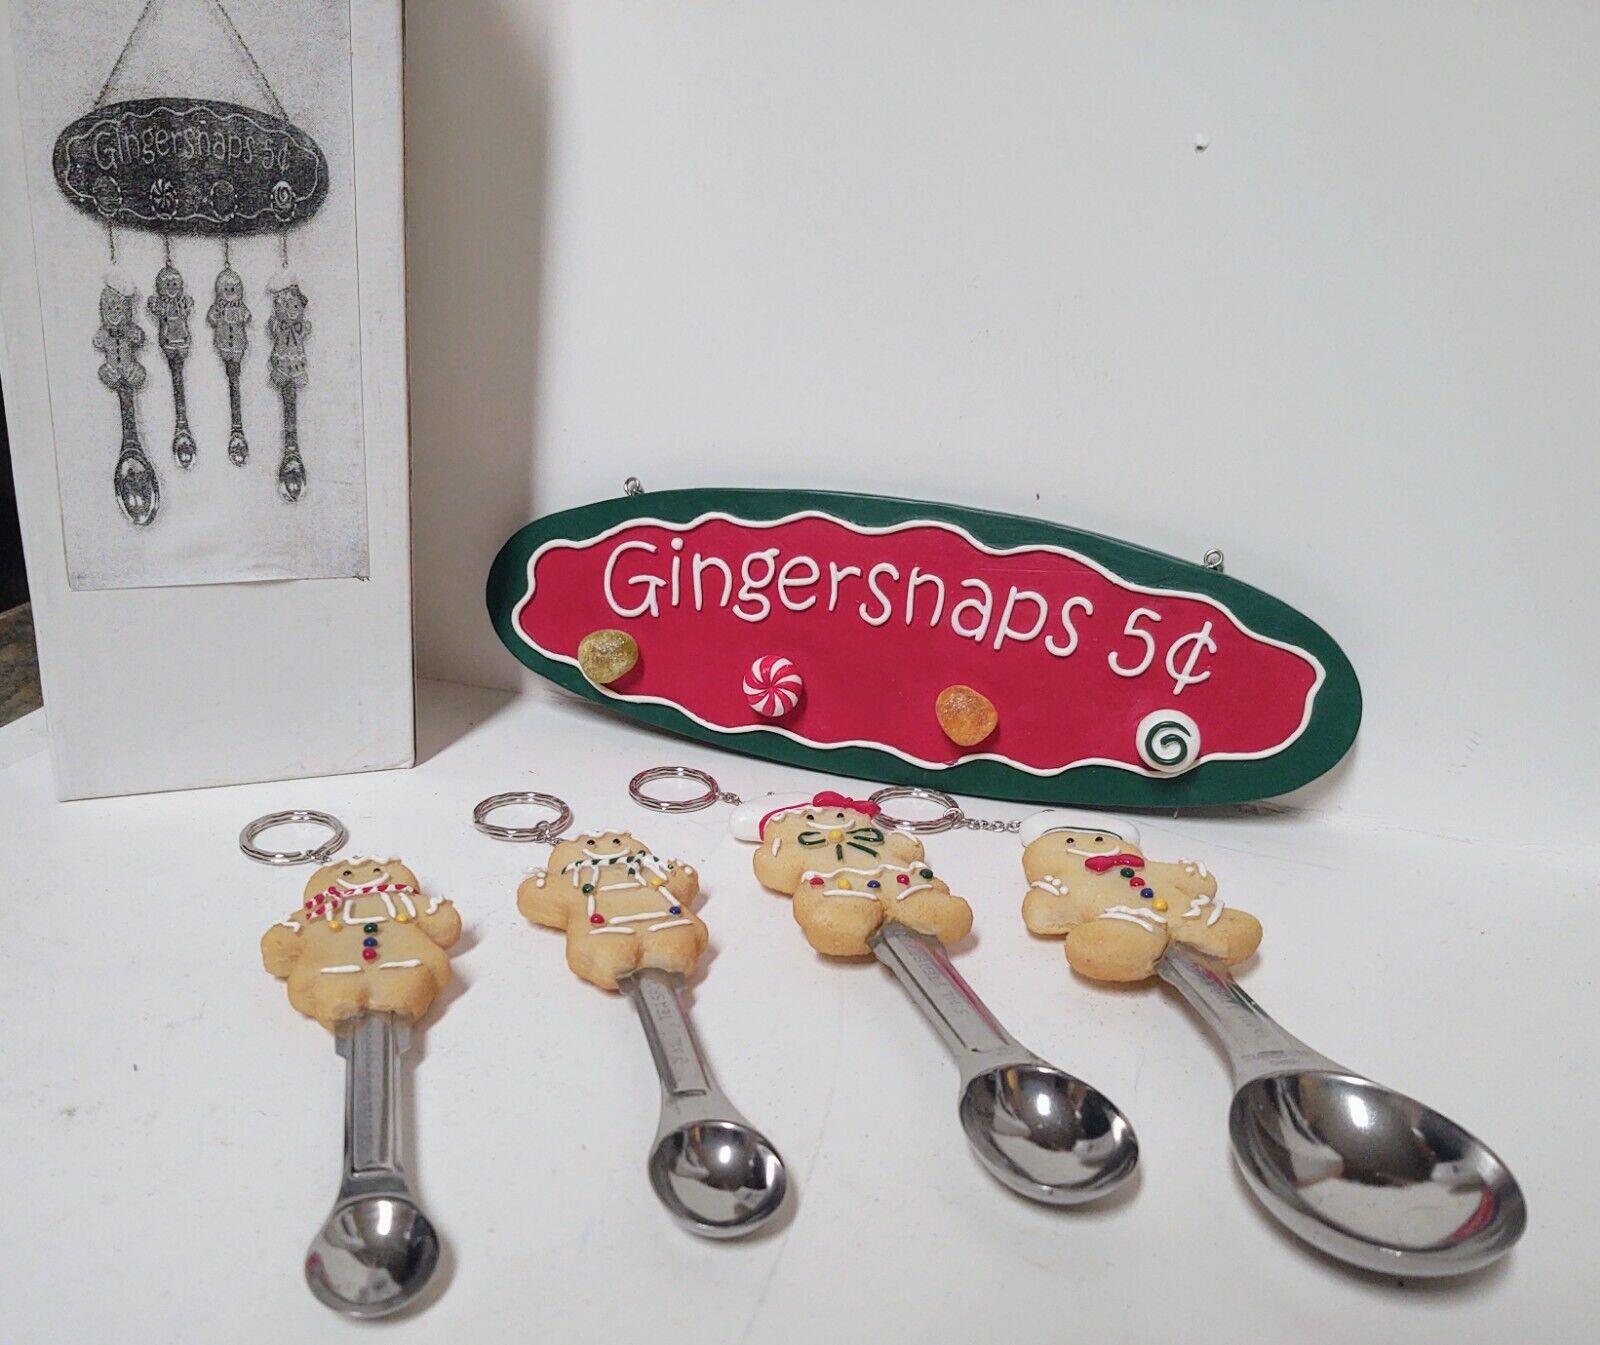 Vintage Pfaltzgraff measuring spoons GINGERSNAP Spoons & Wall plaque hanging